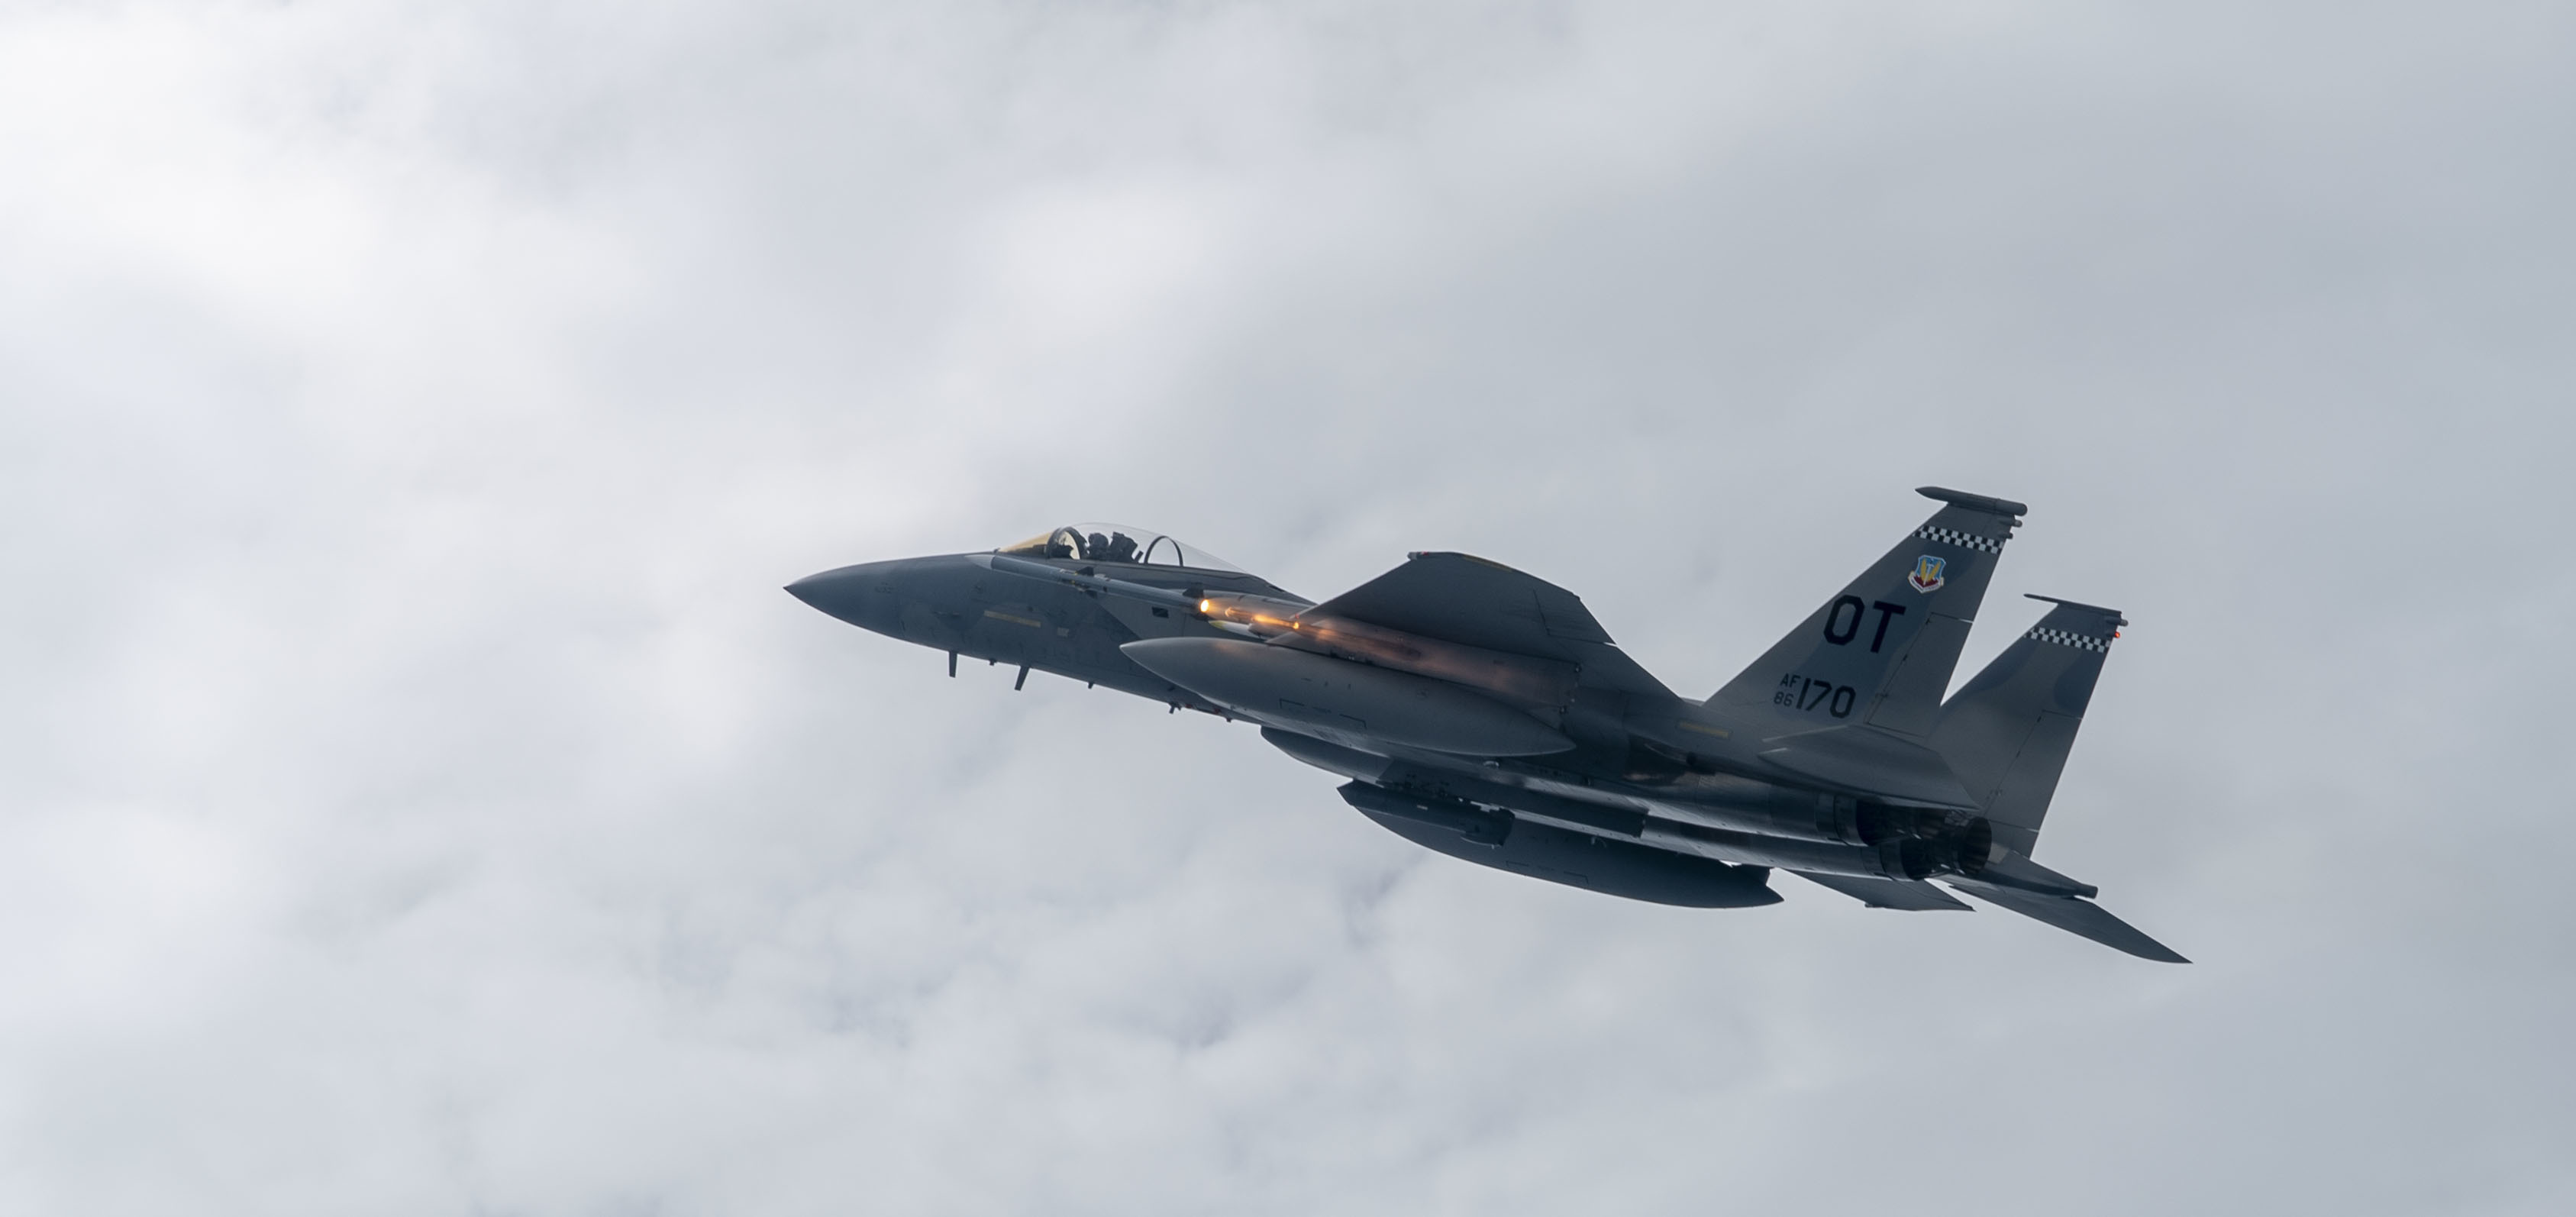 U.S. Air Force Maj. Timothy Phillips from the 40th Flight Test Squadron fires an Advanced Medium Range Air to Air Missile during a test mission from an F-15C Eagle, Eglin Air Force Base, Florida, February 25, 2020. The 40th FLTS executes fighter developmental test and support to deliver war-winning capabilities to the battlefield. (U.S. Air Force photo by Tech. Sgt. John McRell)